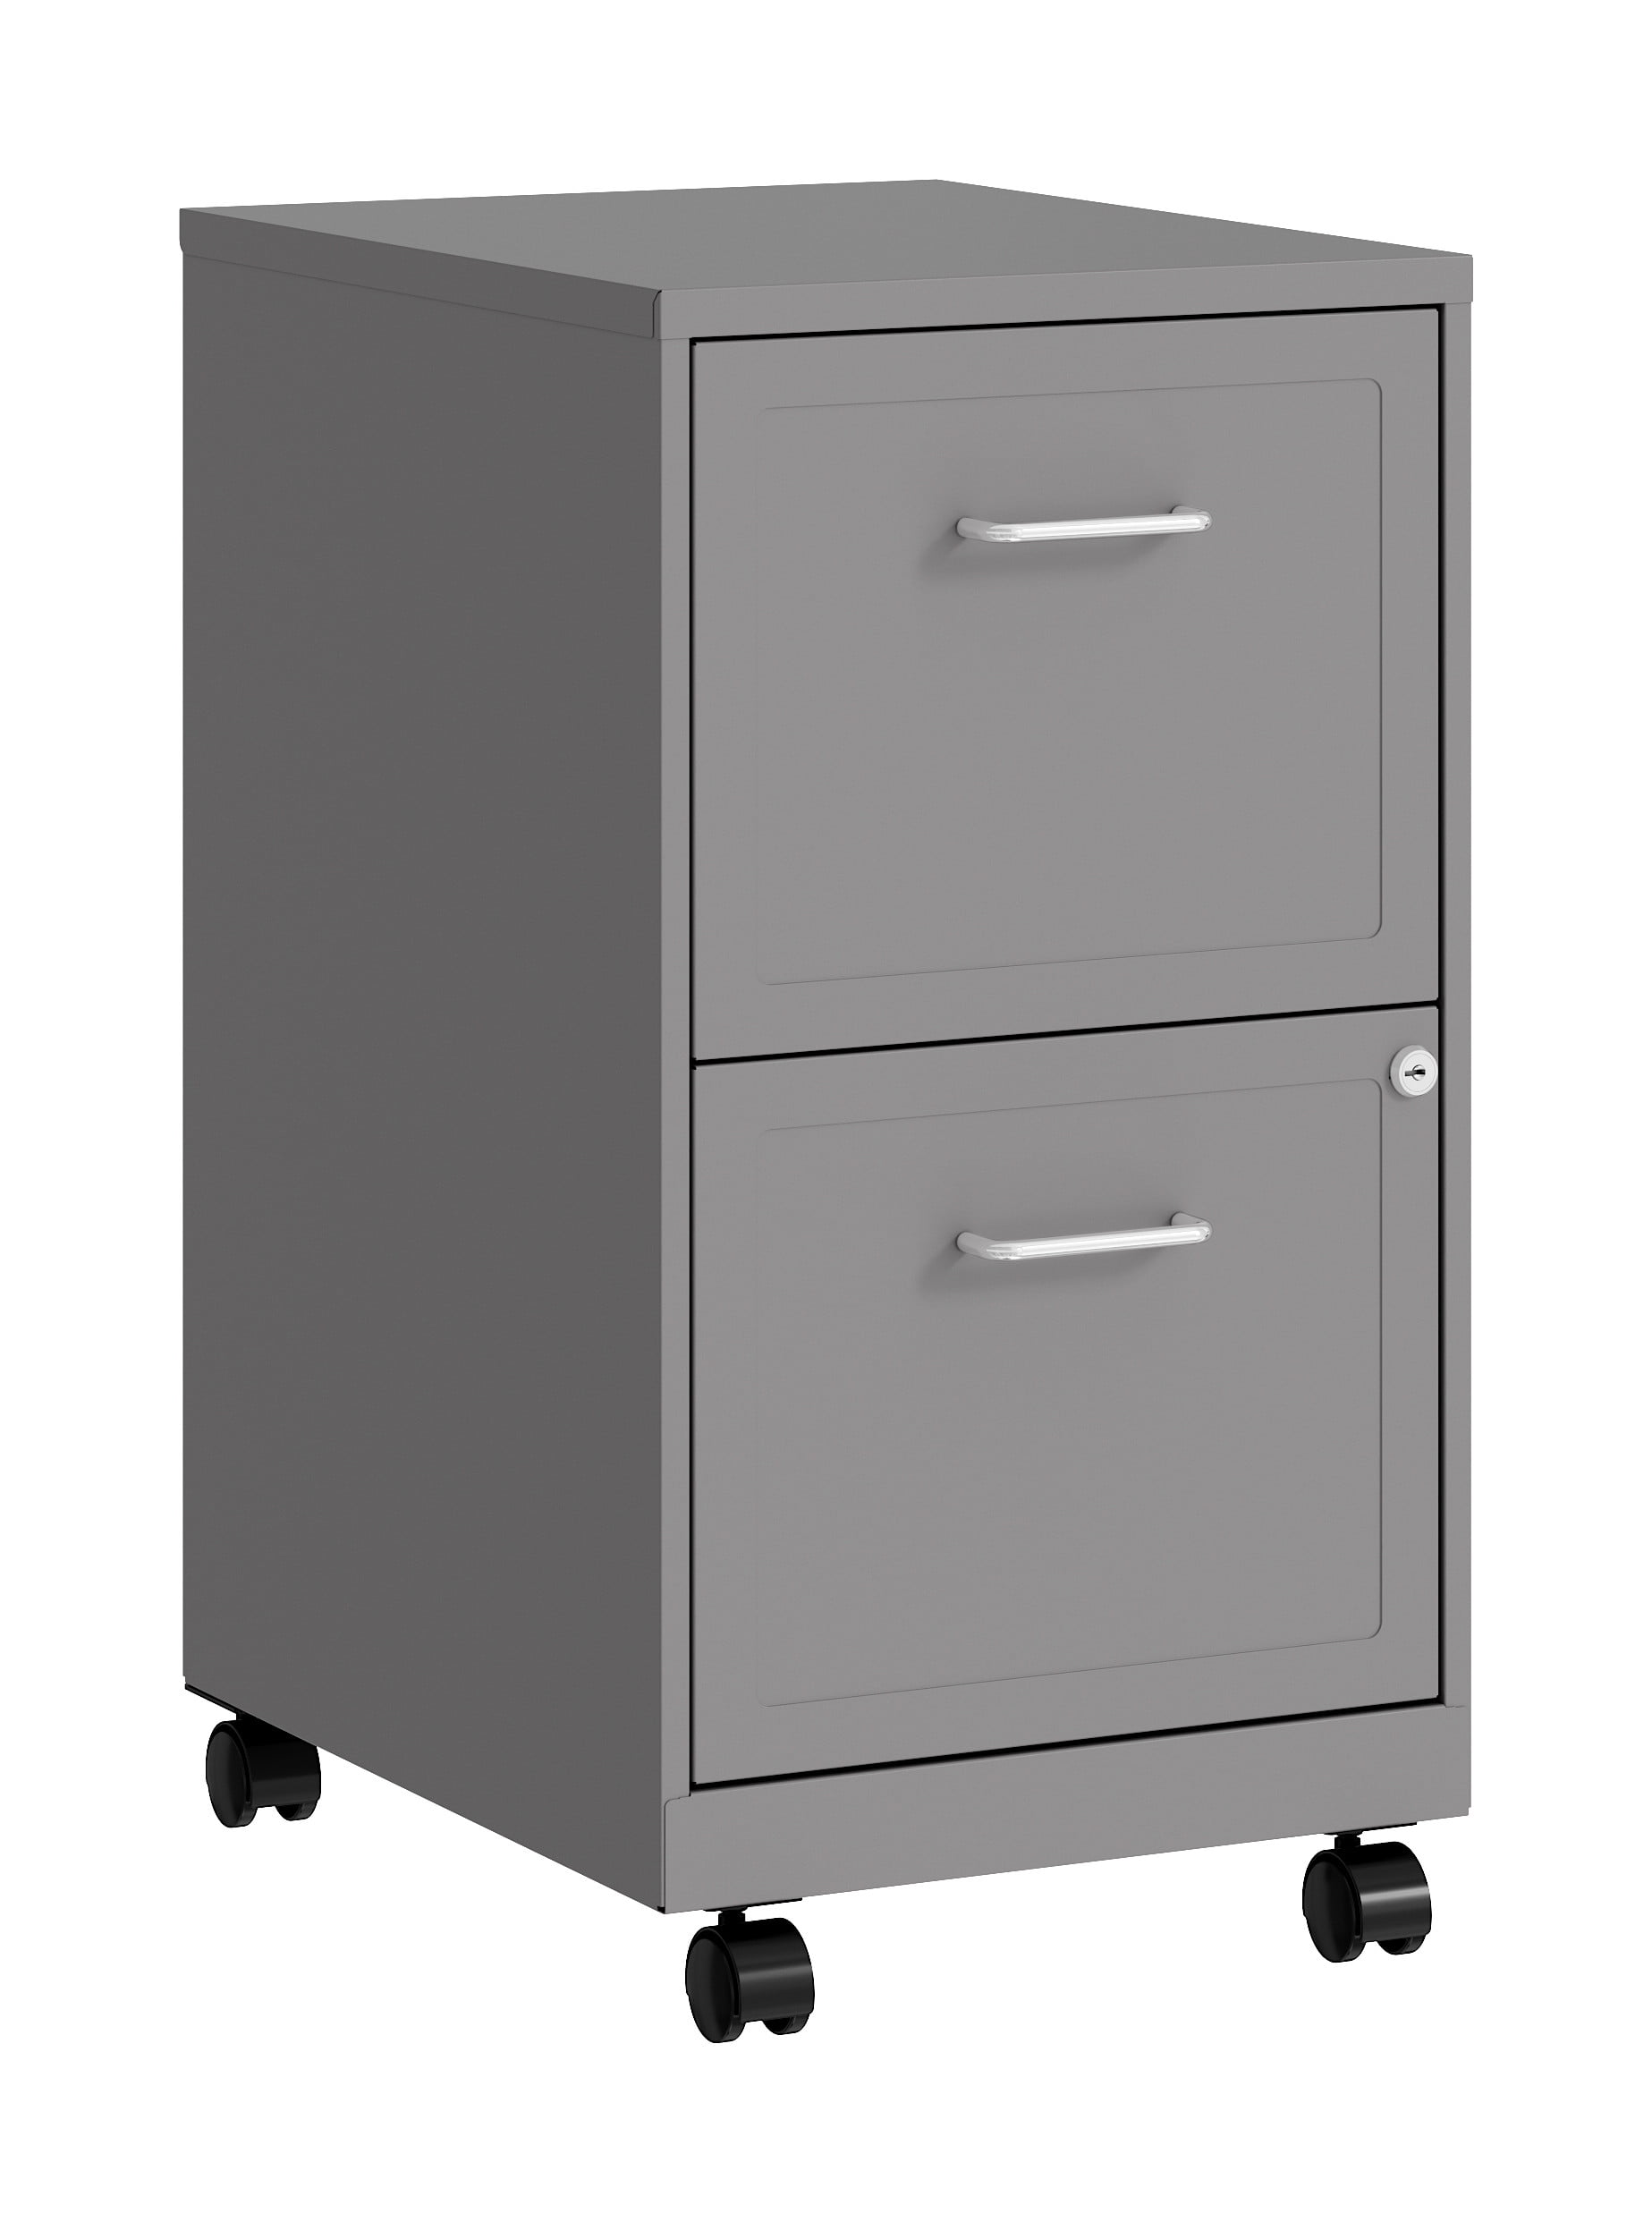 Space Solutions 18" Deep 2 Drawer Mobile Letter Width Vertical File Cabinet, Silver - image 1 of 14